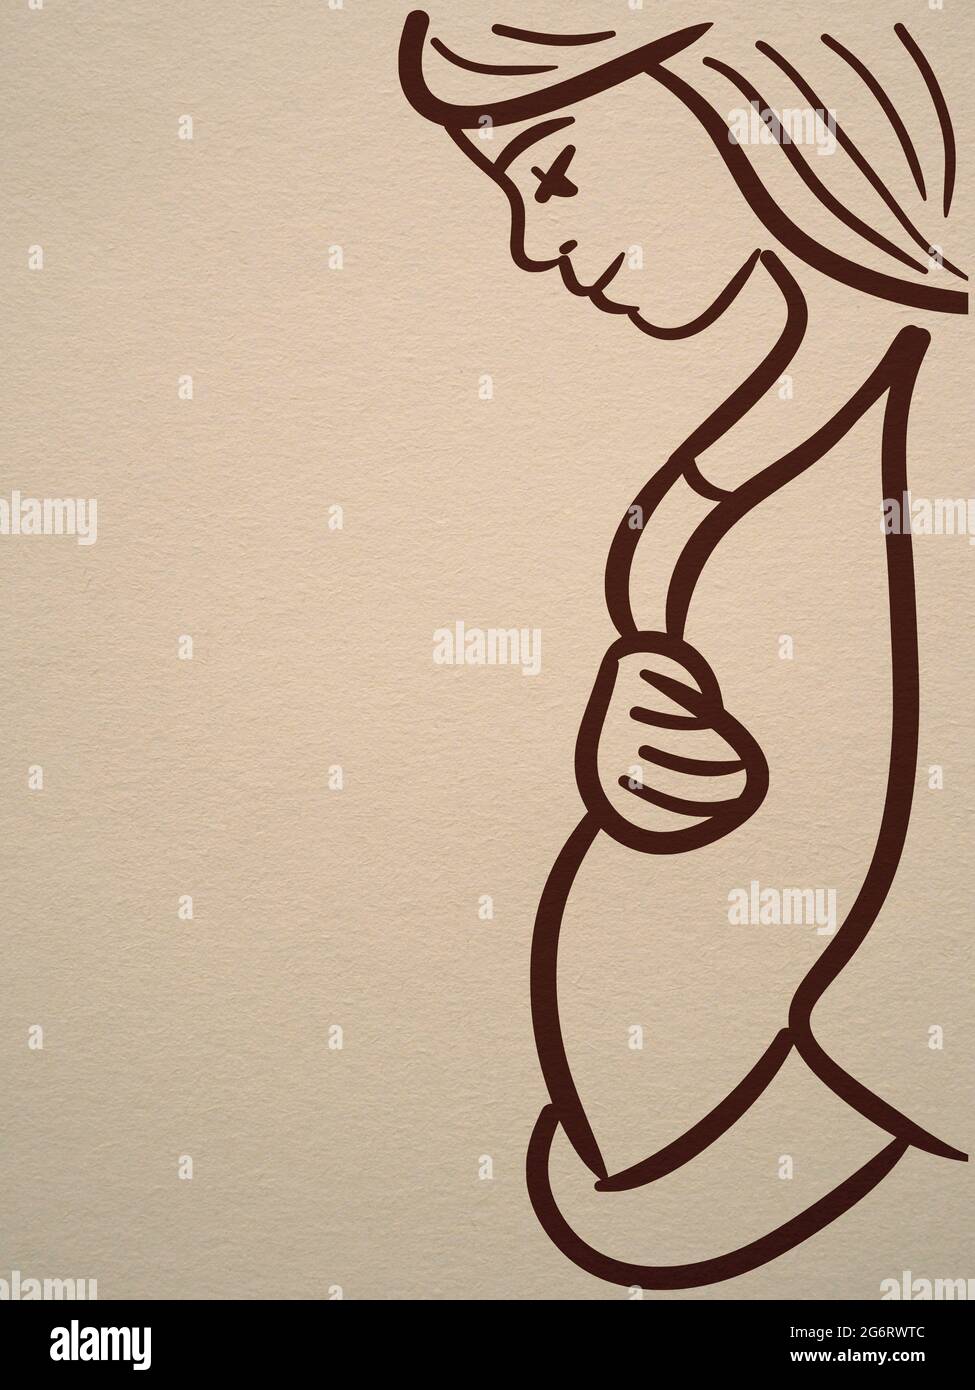 File:209-pregnant-woman-2.svg - Wikimedia Commons